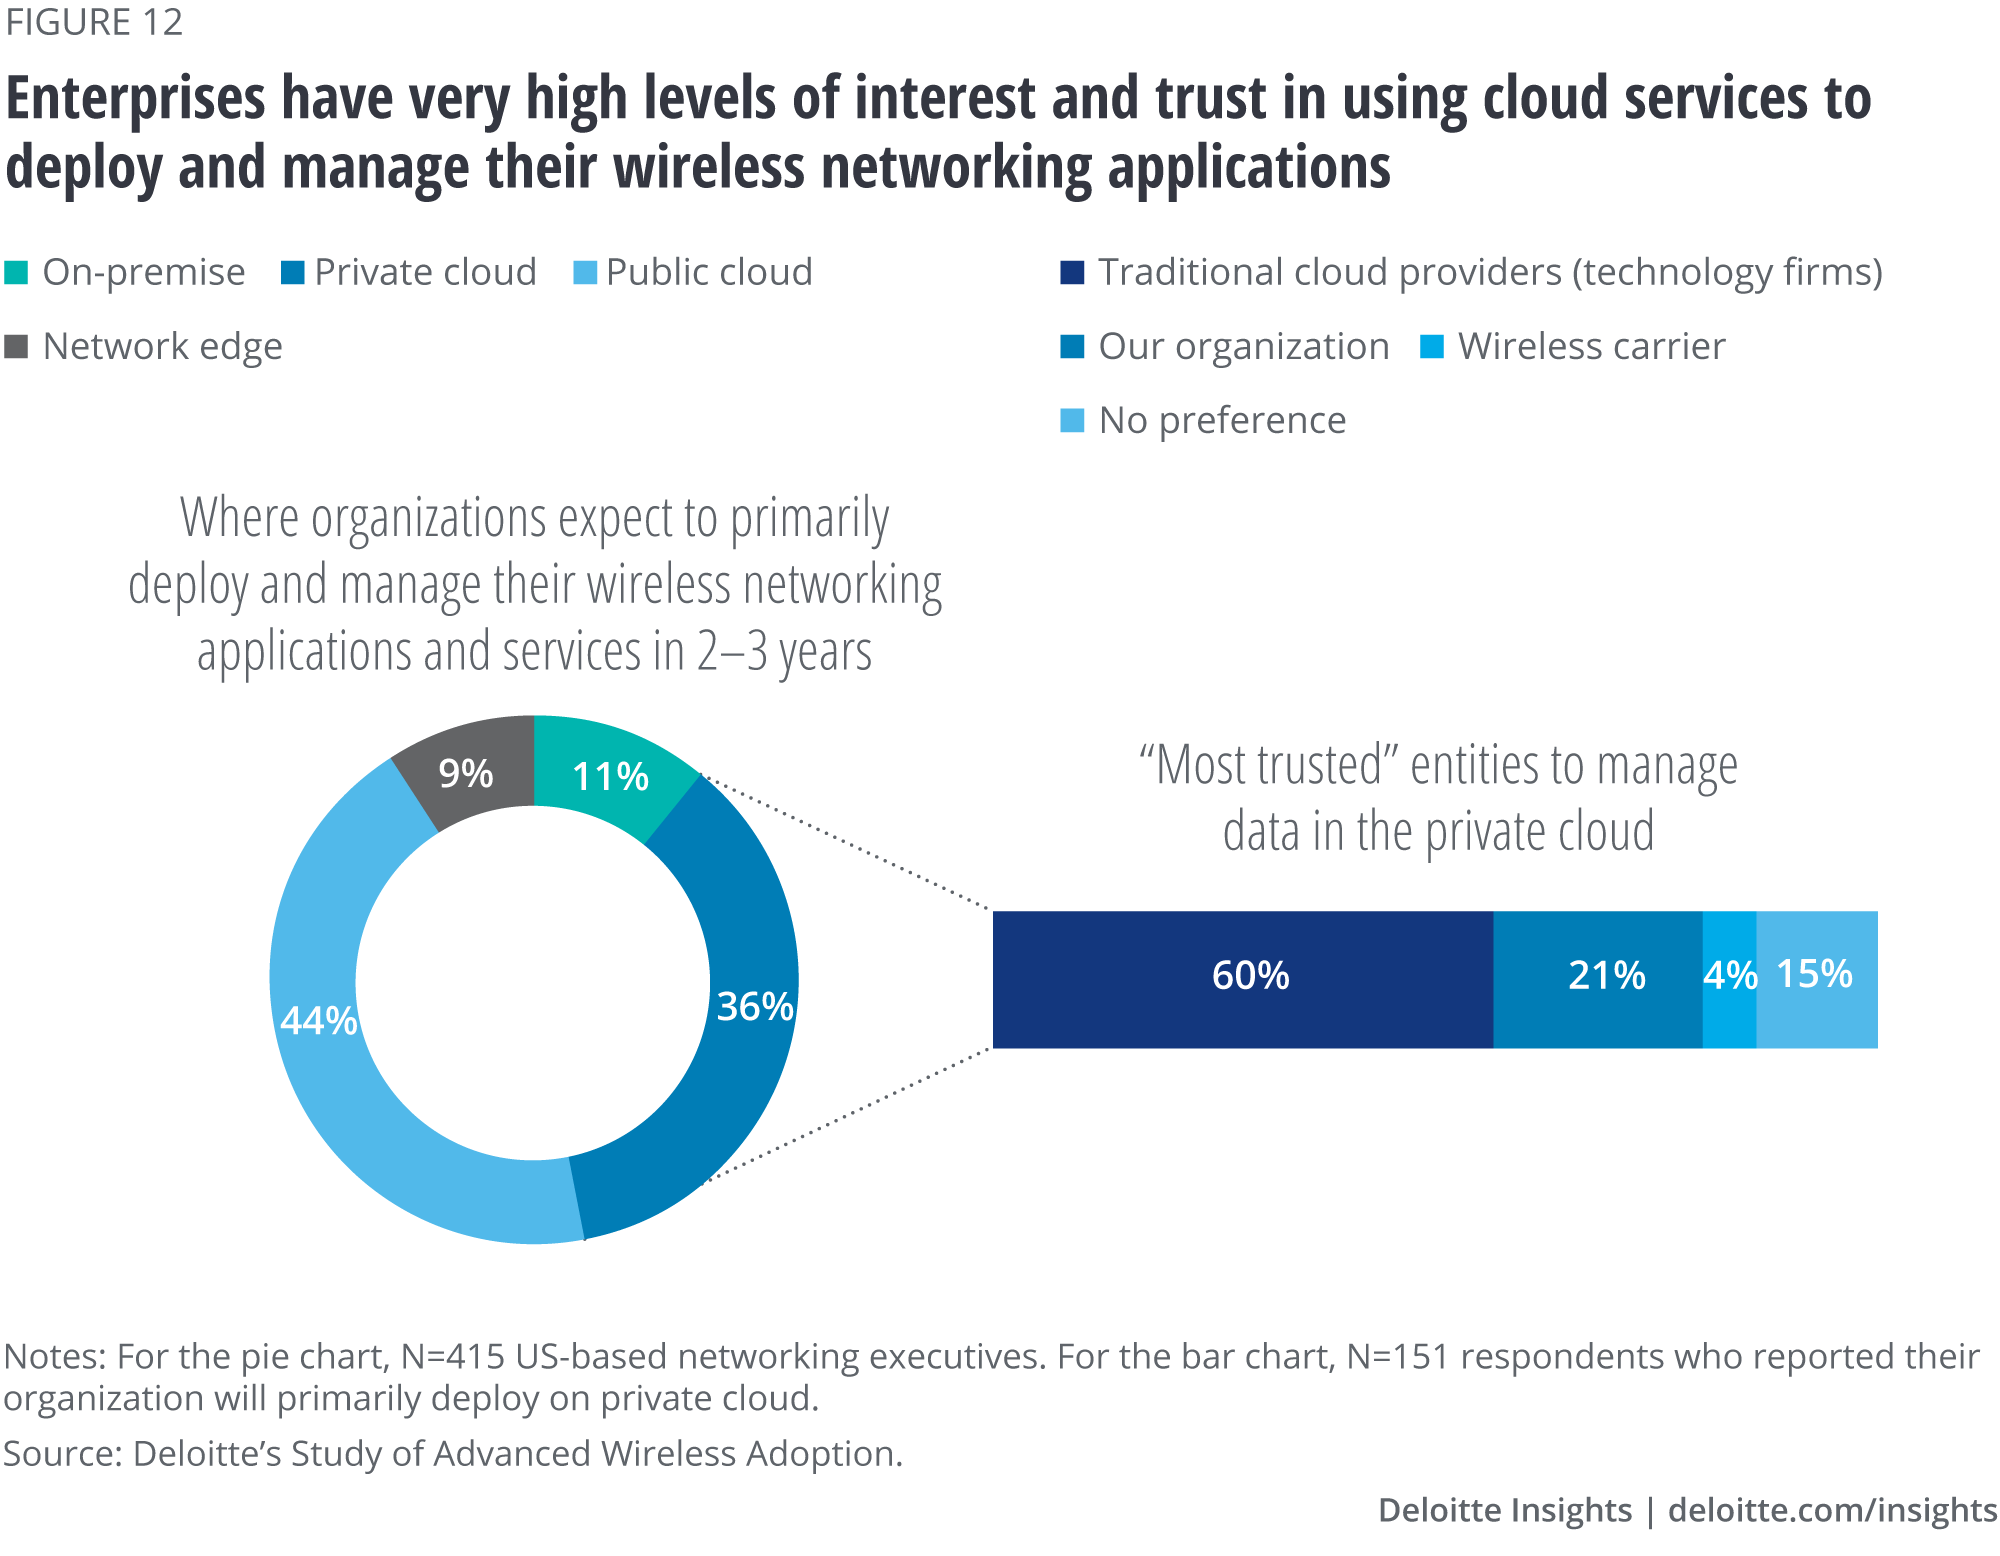 Enterprises have very high levels of interest and trust in using cloud services to deploy and manage their wireless networking applications